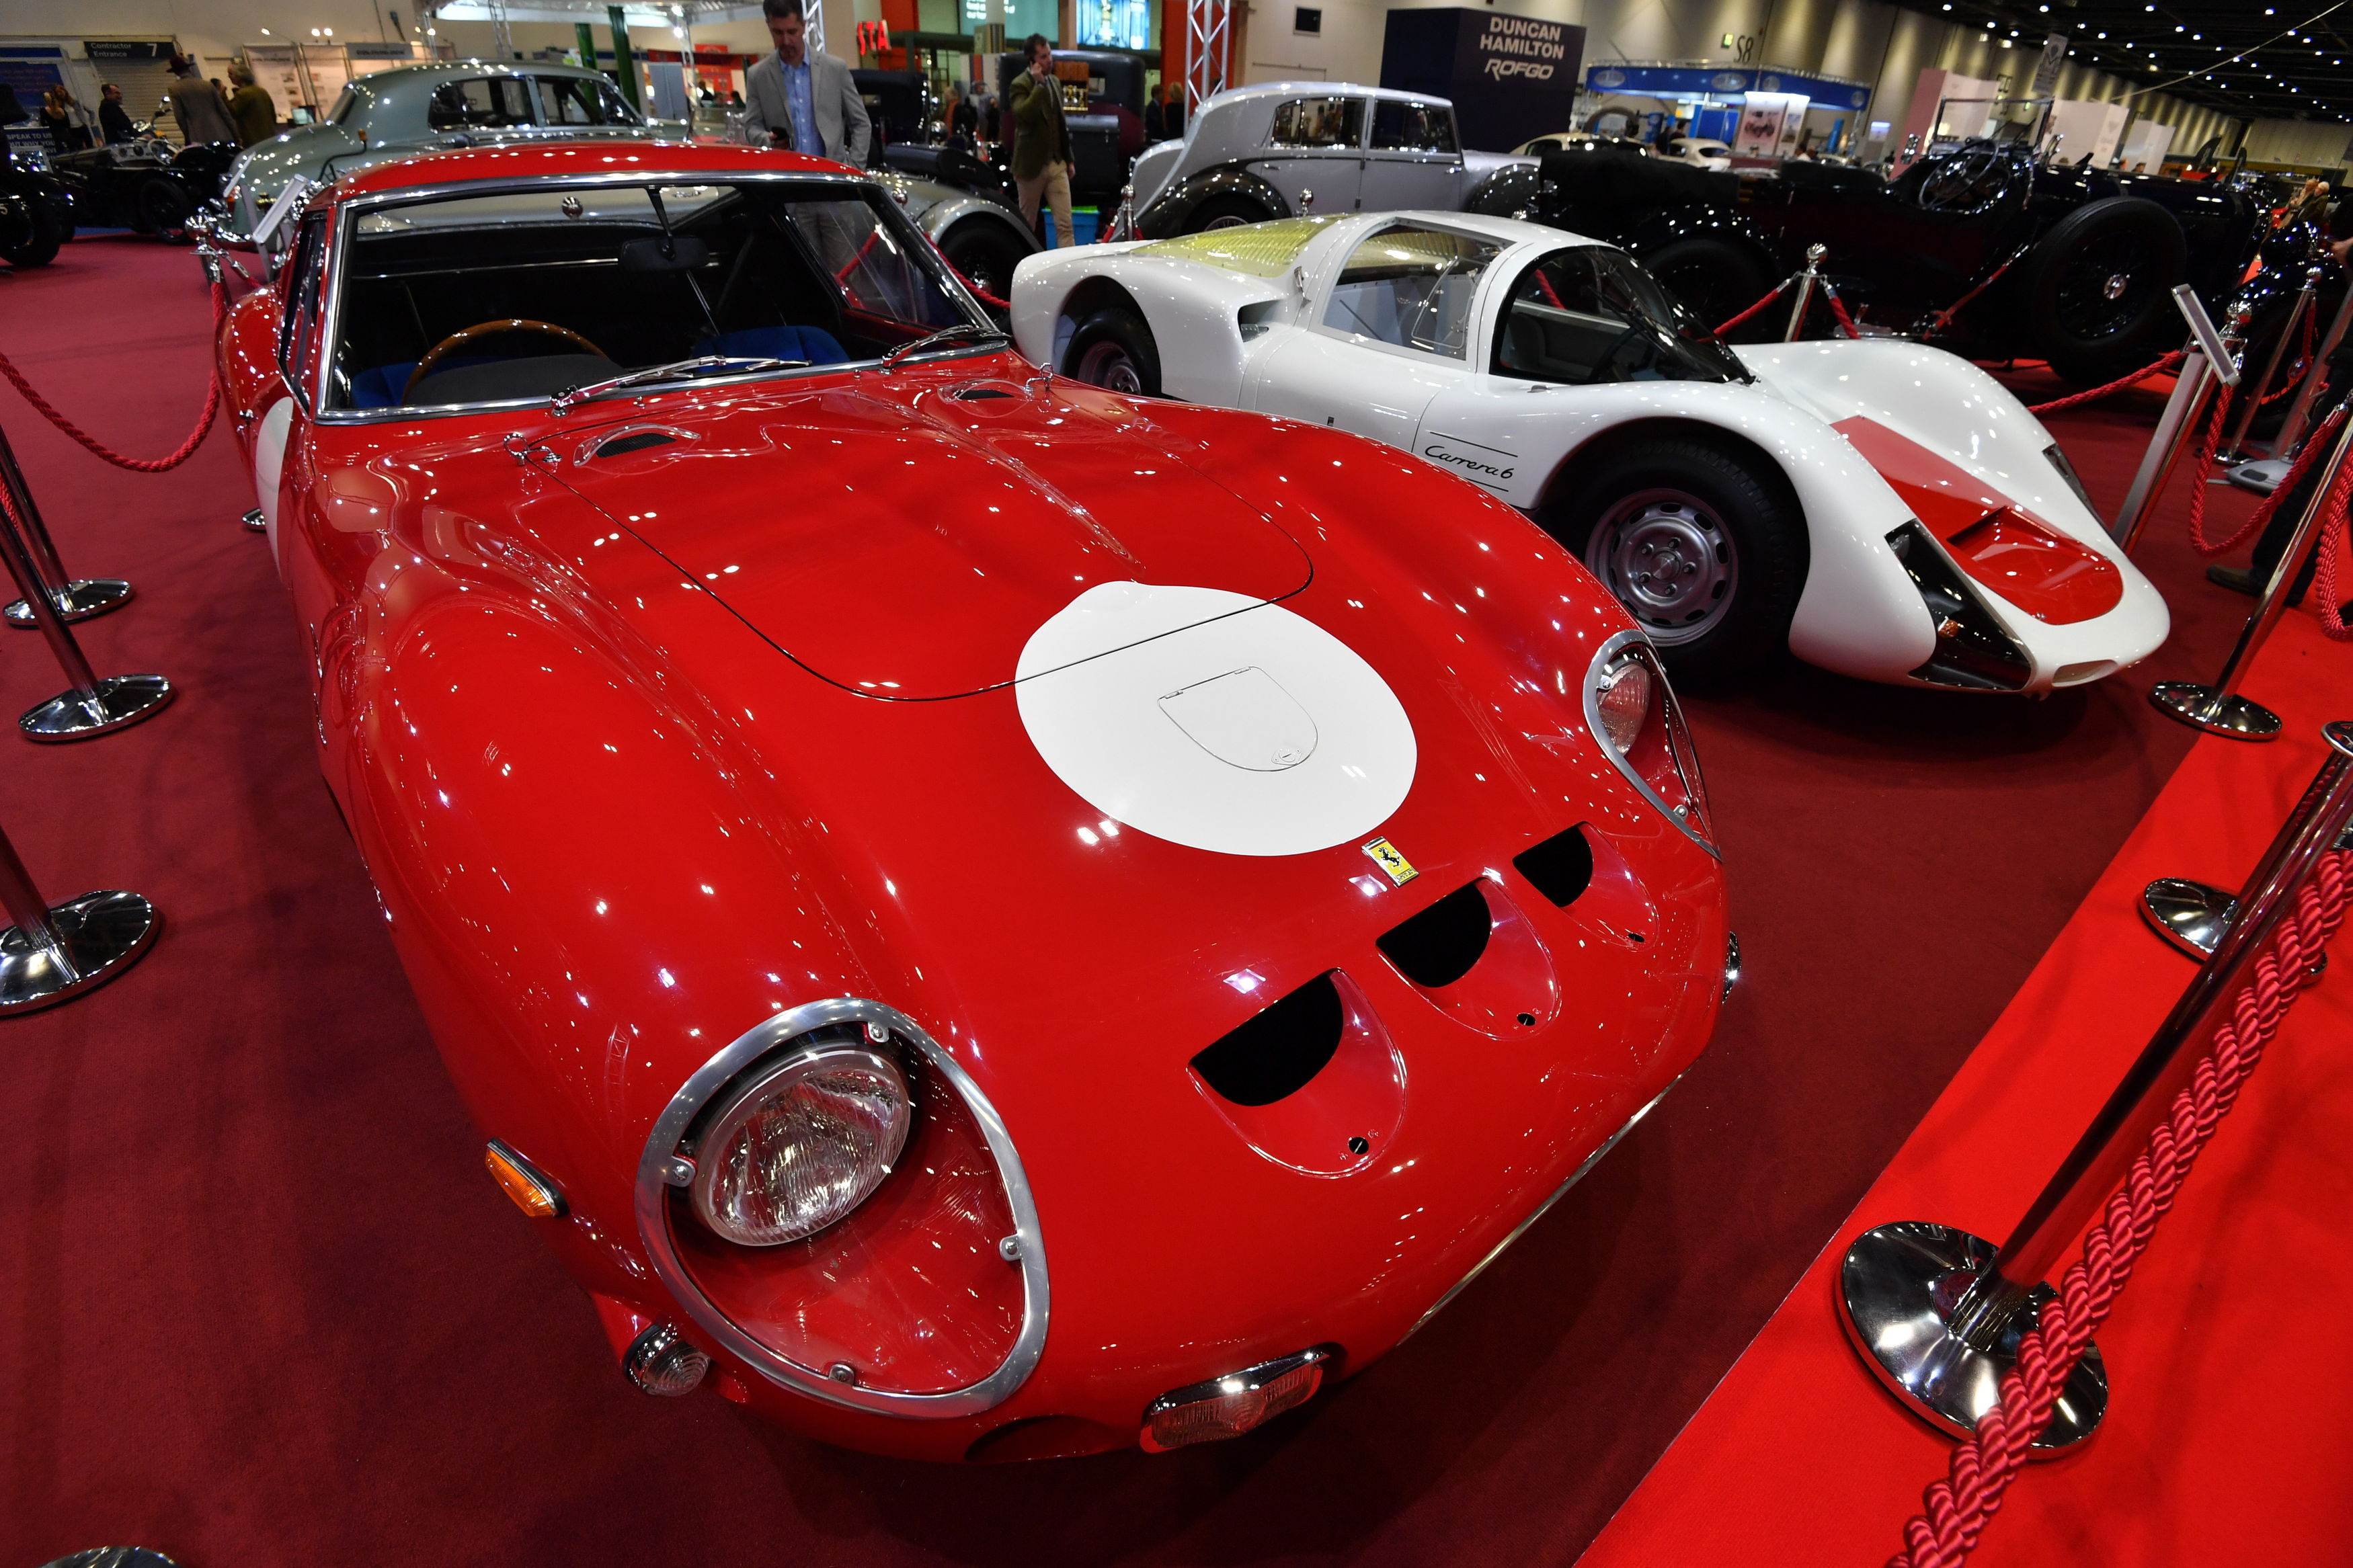 A red 1962 Ferrari 250 GTO (left) and a white 1966 Porsche 906 at the preview for the London Classic Car Show, at ExCeL in London on February 15, 2018. (John Stillwell—PA Wire—AP)